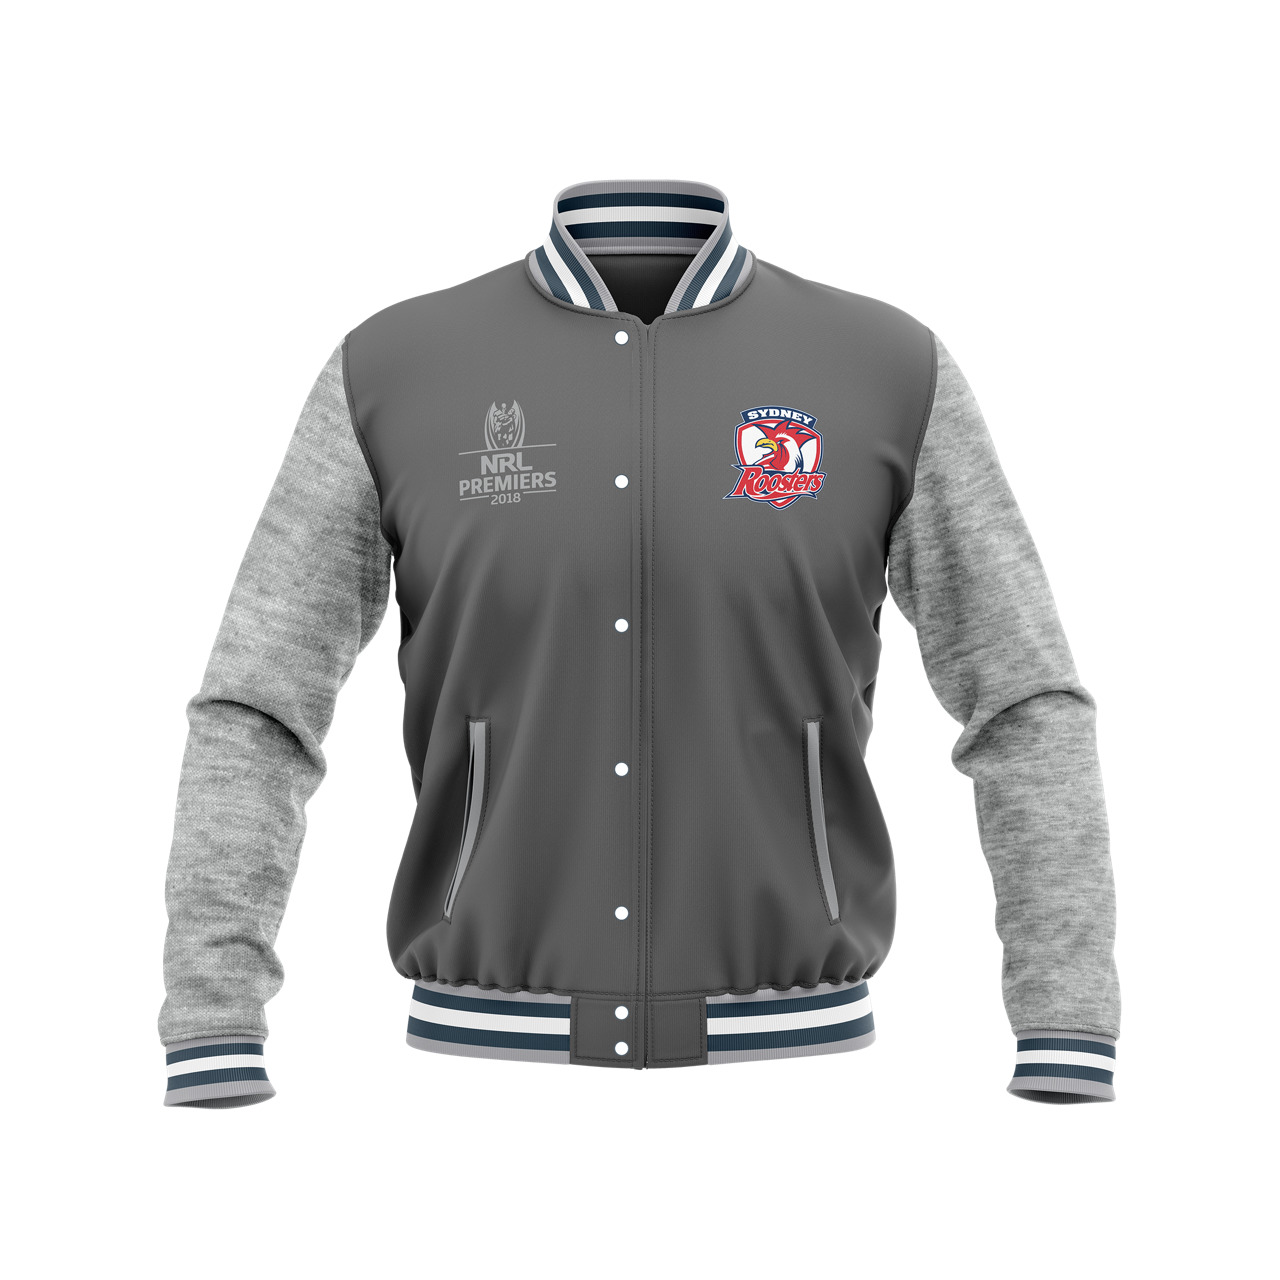 Sydney Roosters 2018 NRL Premiers Varsity Jacket (Sizes S - 5XL) - ISC